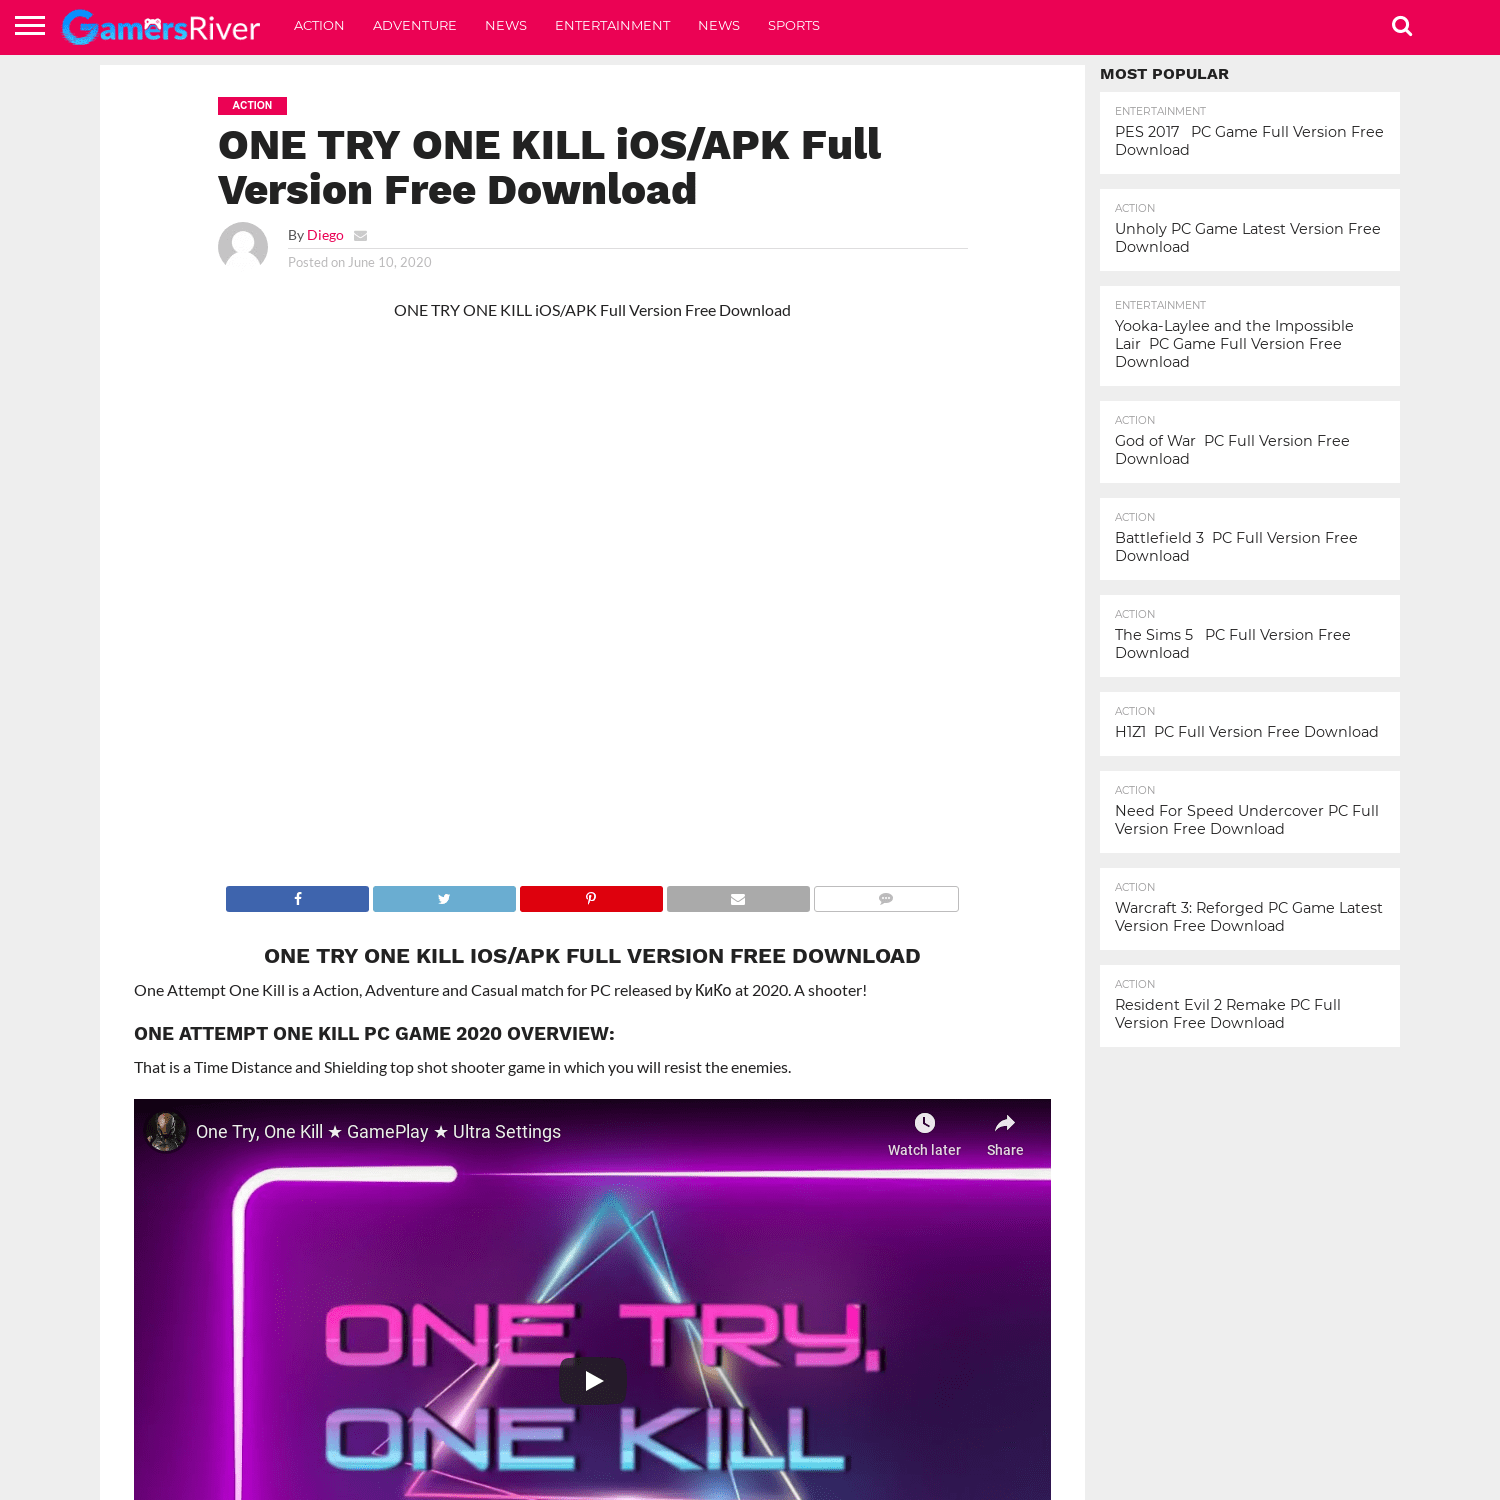 ONE TRY ONE KILL iOS/APK Full Version Free Download